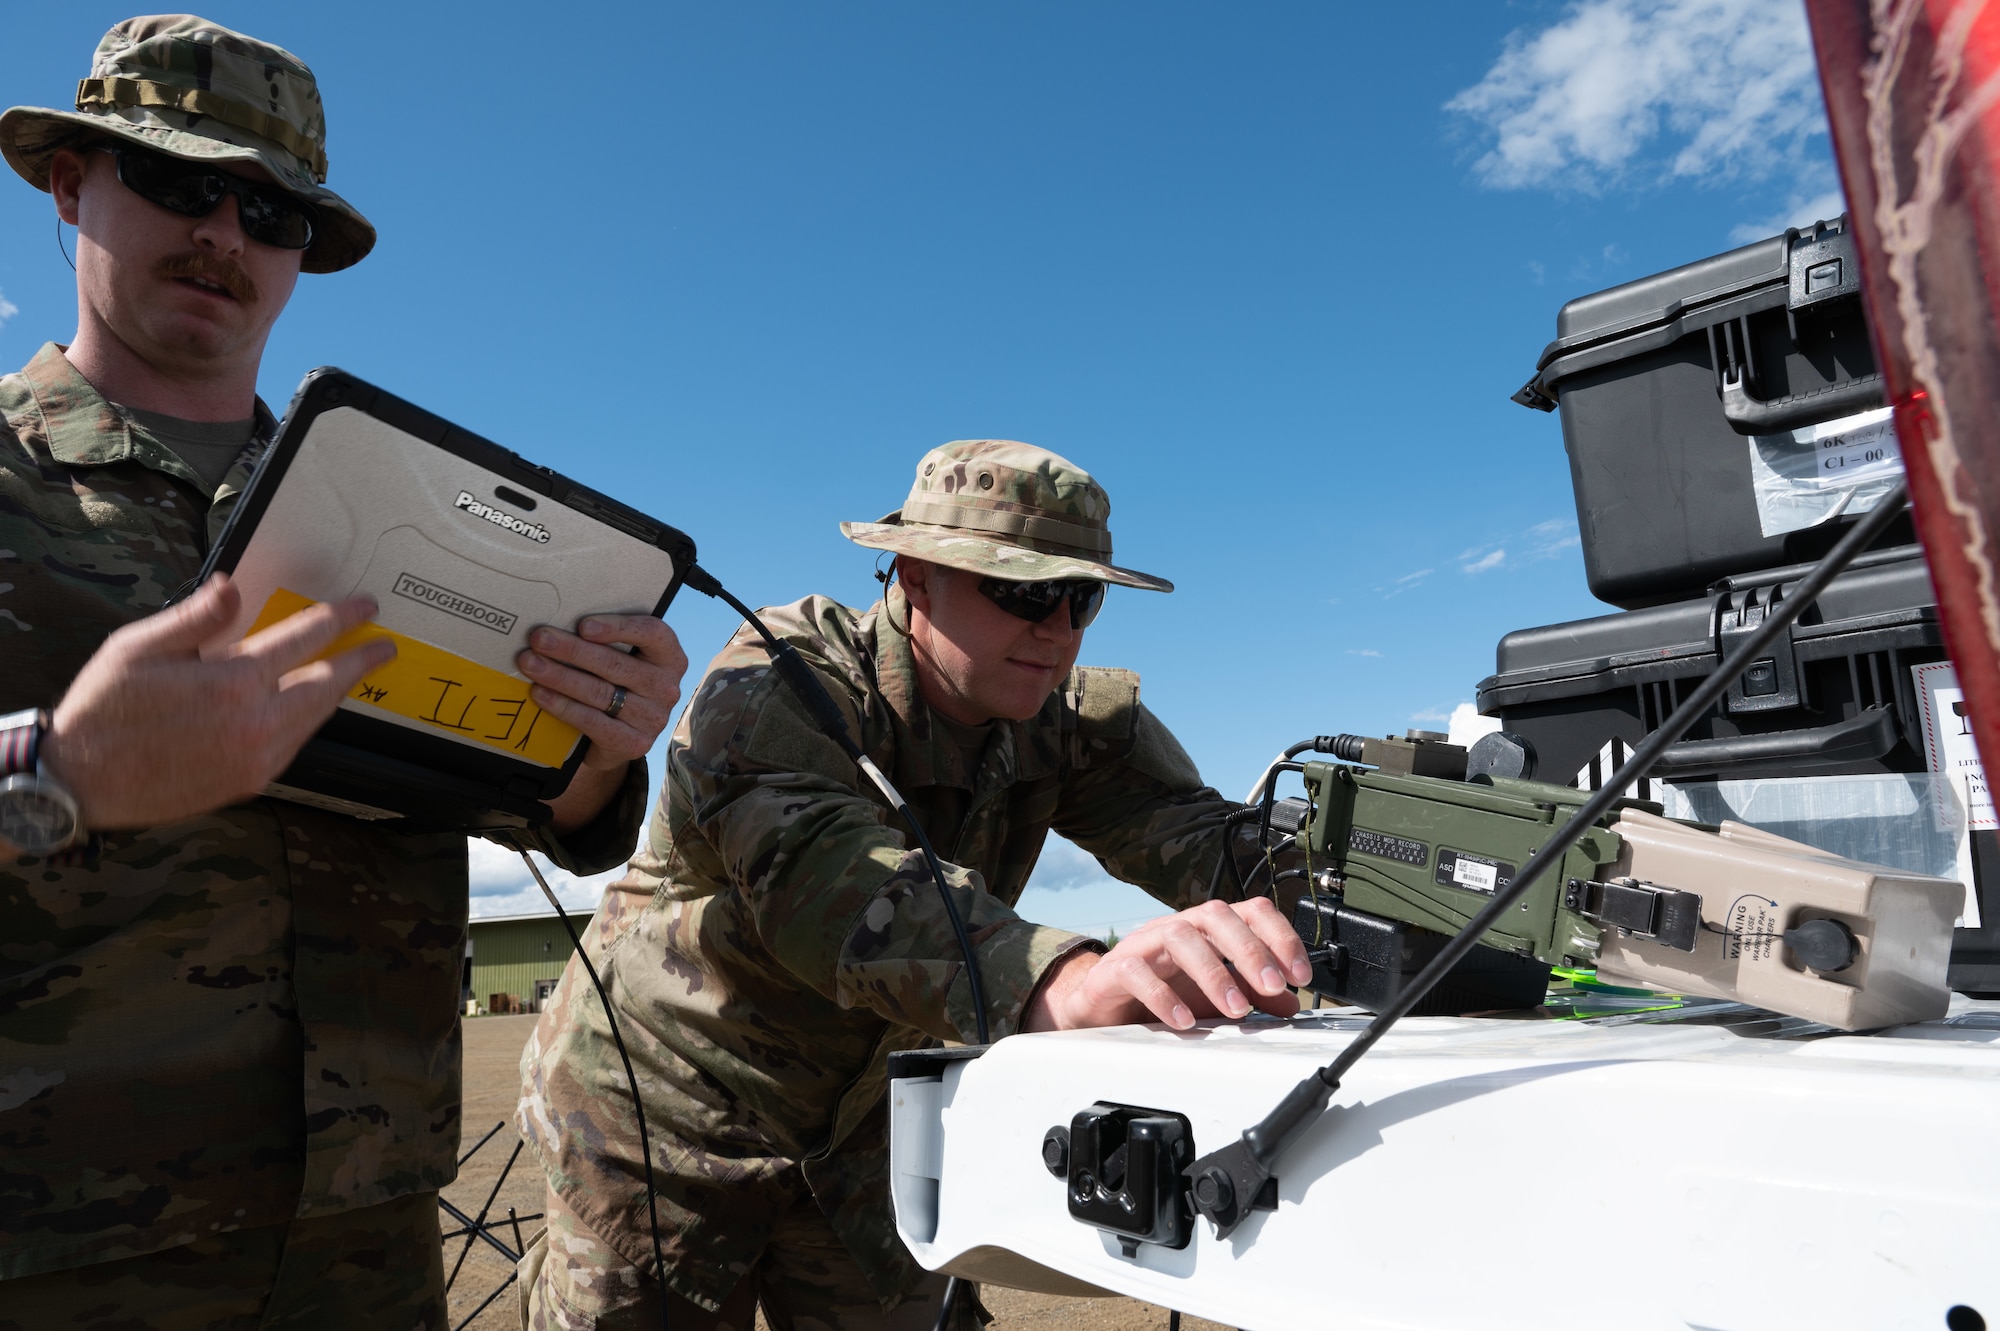 U.S. Air Force Tech Sgt. Laramie Grisba (left) and Tech Sgt. Collin Lopes (right) radio frequency transmission systems specialists from the 55th and 35th Combat Communications Squadrons, Tinker Air Force Base, Oklahoma set up a high frequency radio communication device in Coldfoot, Alaska as part of Phase 2 of AGILE BLIZZARD-UNIFIED VISION June 11, 2023. This radio device provided both visual and auditory communication capabilities. (U.S. Air Force photo by Staff Sgt. Dana Tourtellotte)